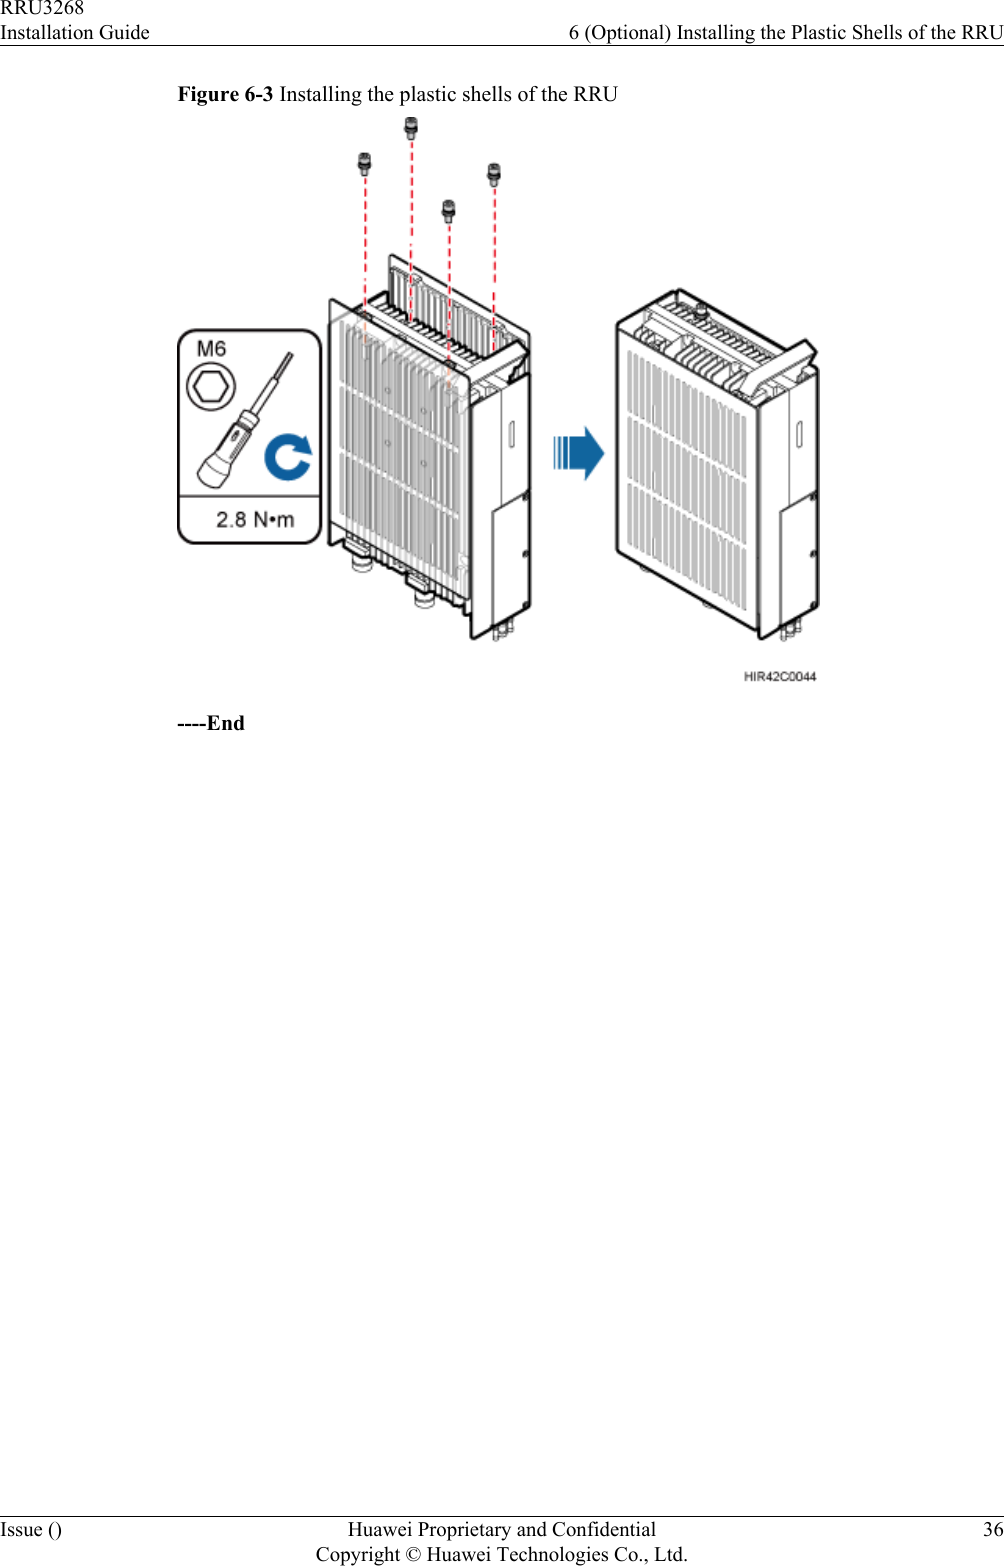 Figure 6-3 Installing the plastic shells of the RRU----EndRRU3268Installation Guide 6 (Optional) Installing the Plastic Shells of the RRUIssue () Huawei Proprietary and ConfidentialCopyright © Huawei Technologies Co., Ltd.36